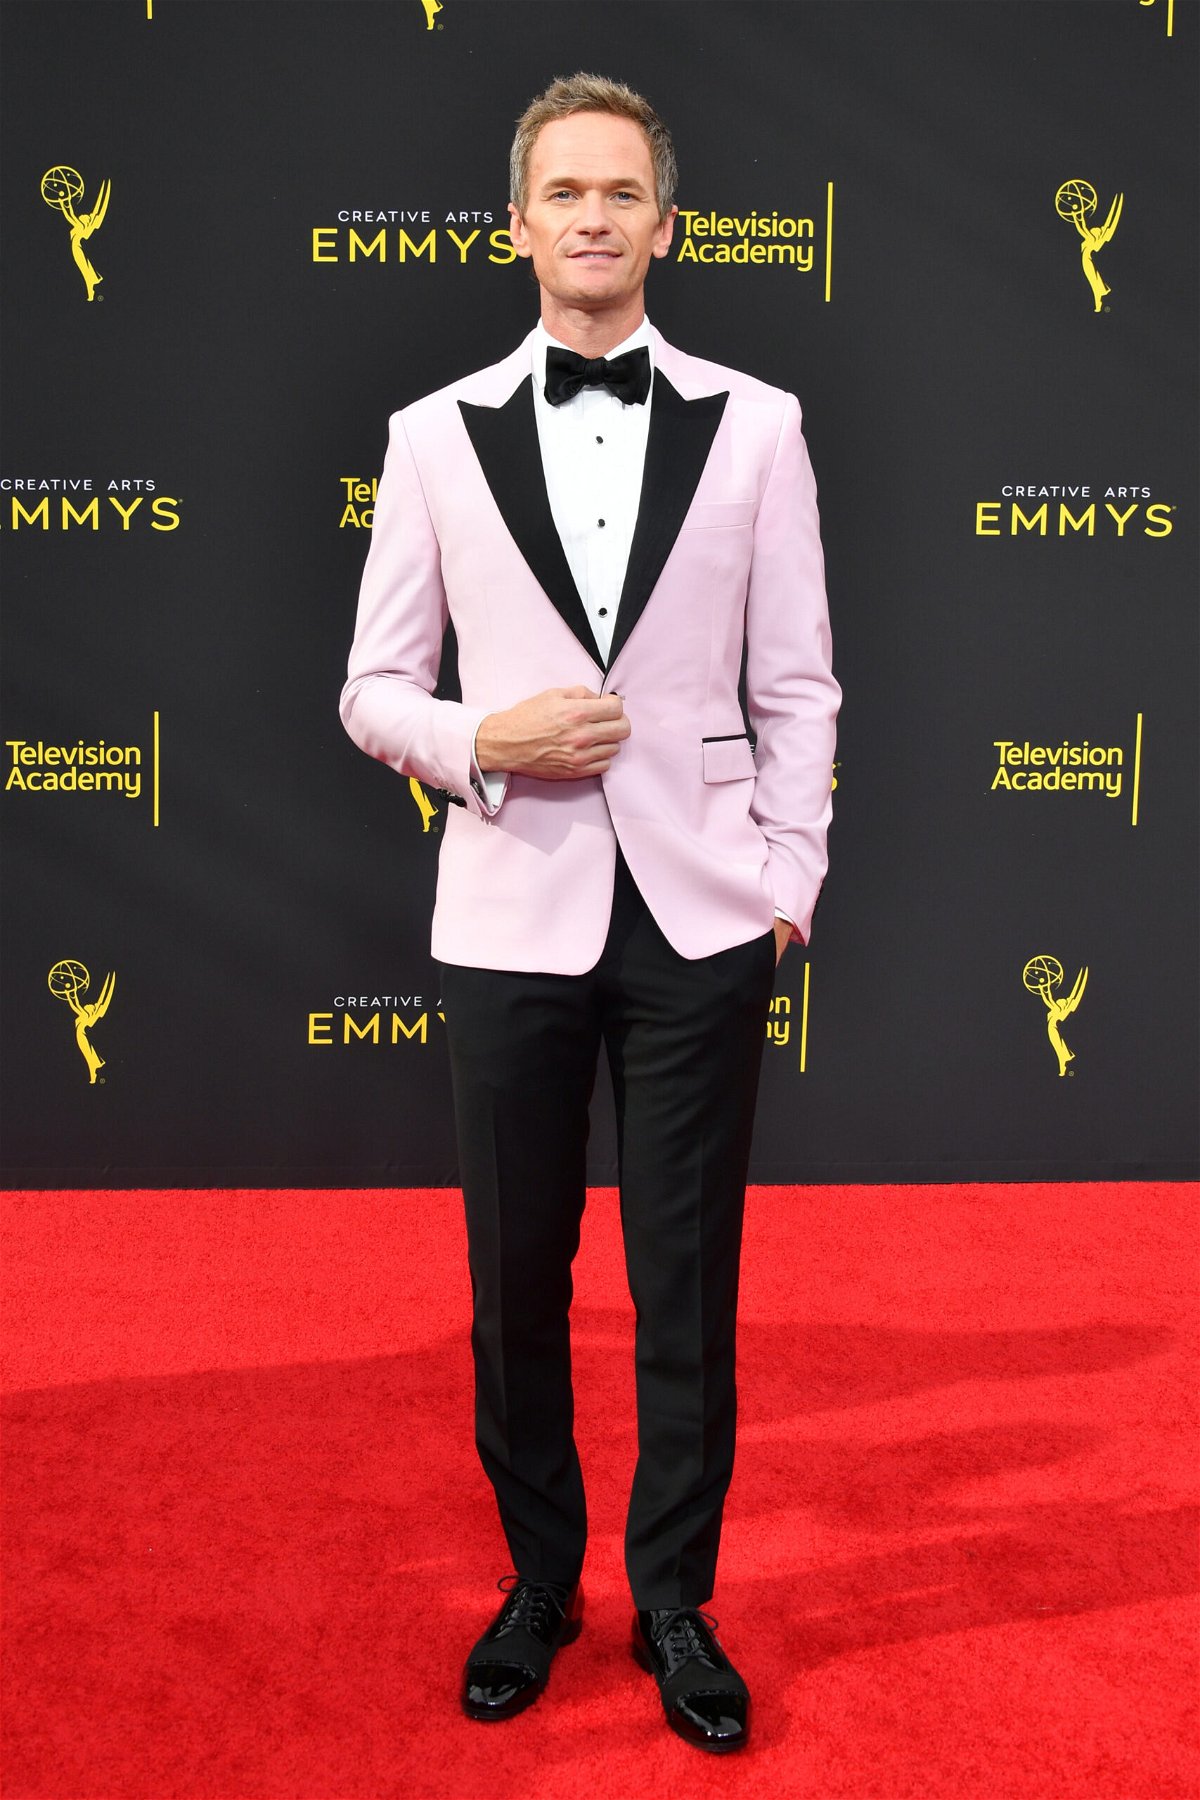 <i>Amy Sussman/Getty Images North America/Getty Images</i><br/>Neil Patrick Harris has created a weekly newsletter that is free. He was inspired to create it while home during the Covid-19 pandemic. The actor is shown here at the 2019 Creative Arts Emmy Awards on September 15